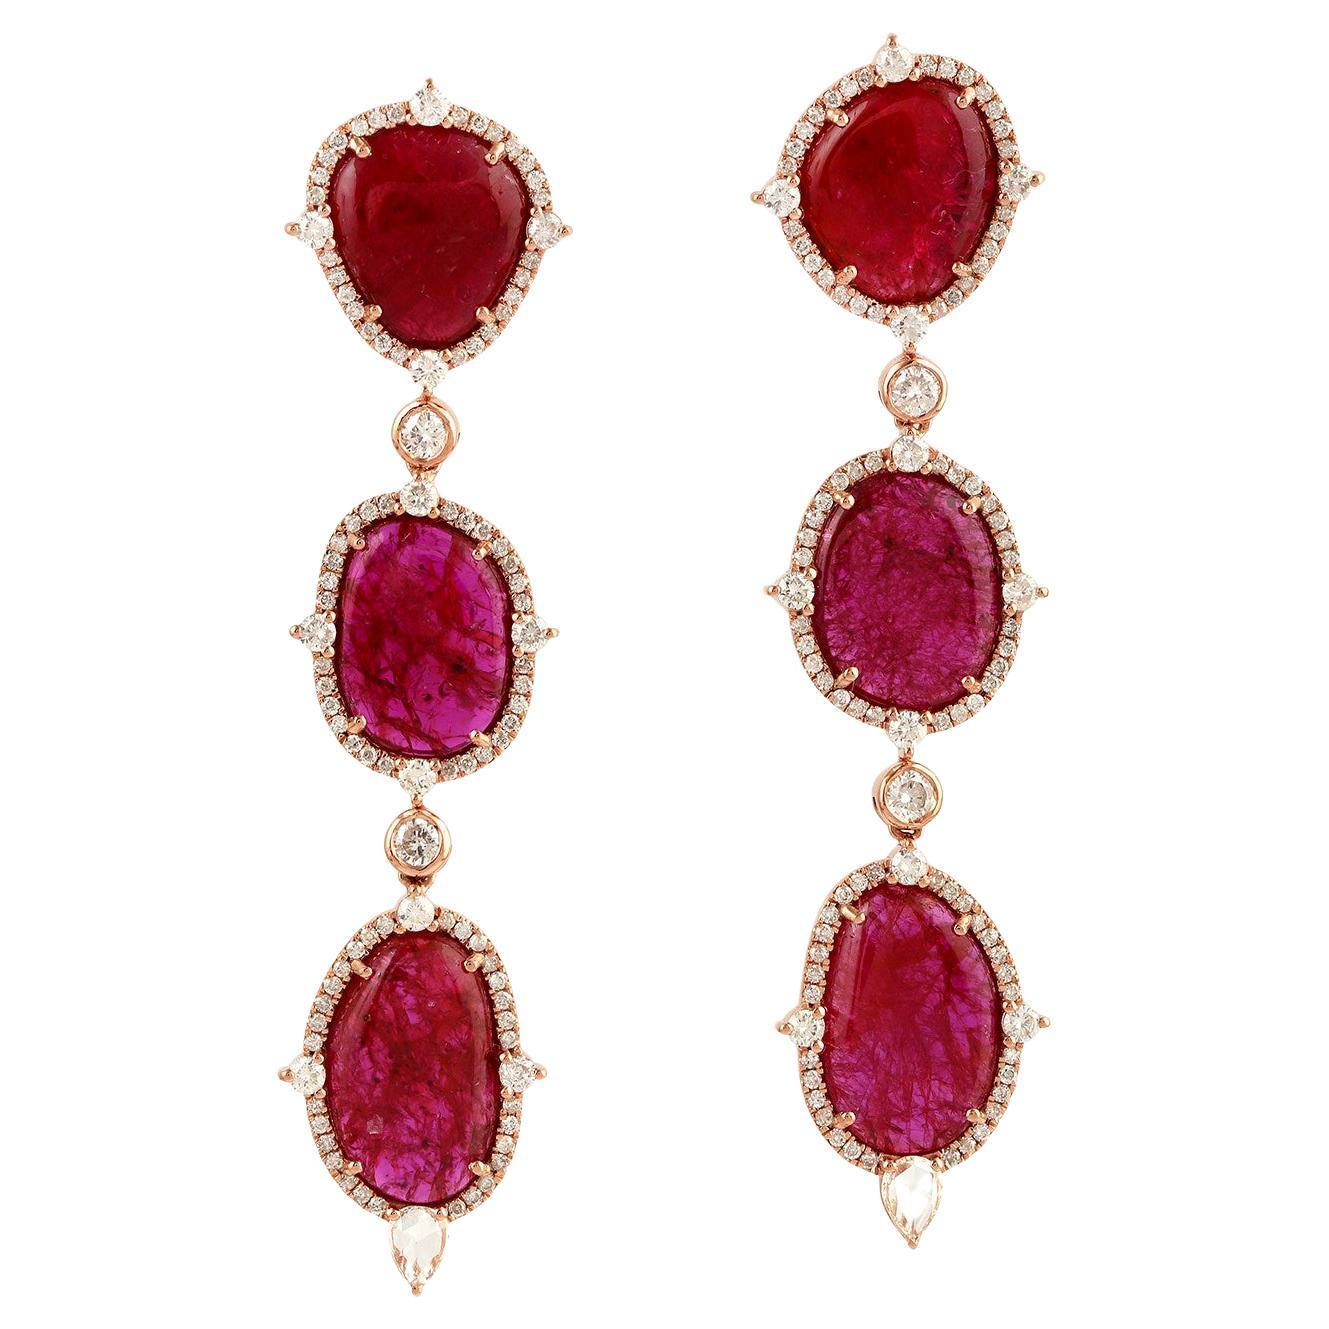 21.34ct 3 Tier Ruby Dangle Earrings With Diamonds Made In 18k Yellow Gold For Sale